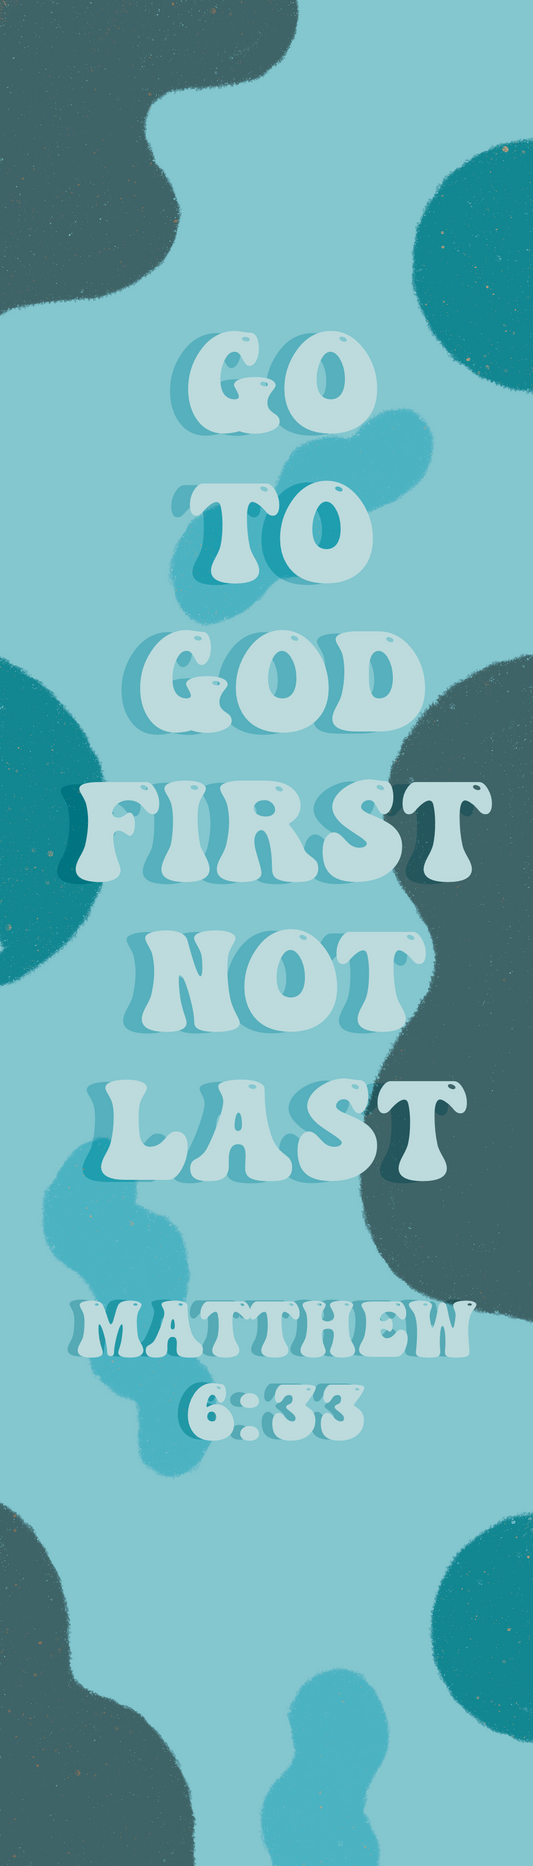 Go to God first Book mark